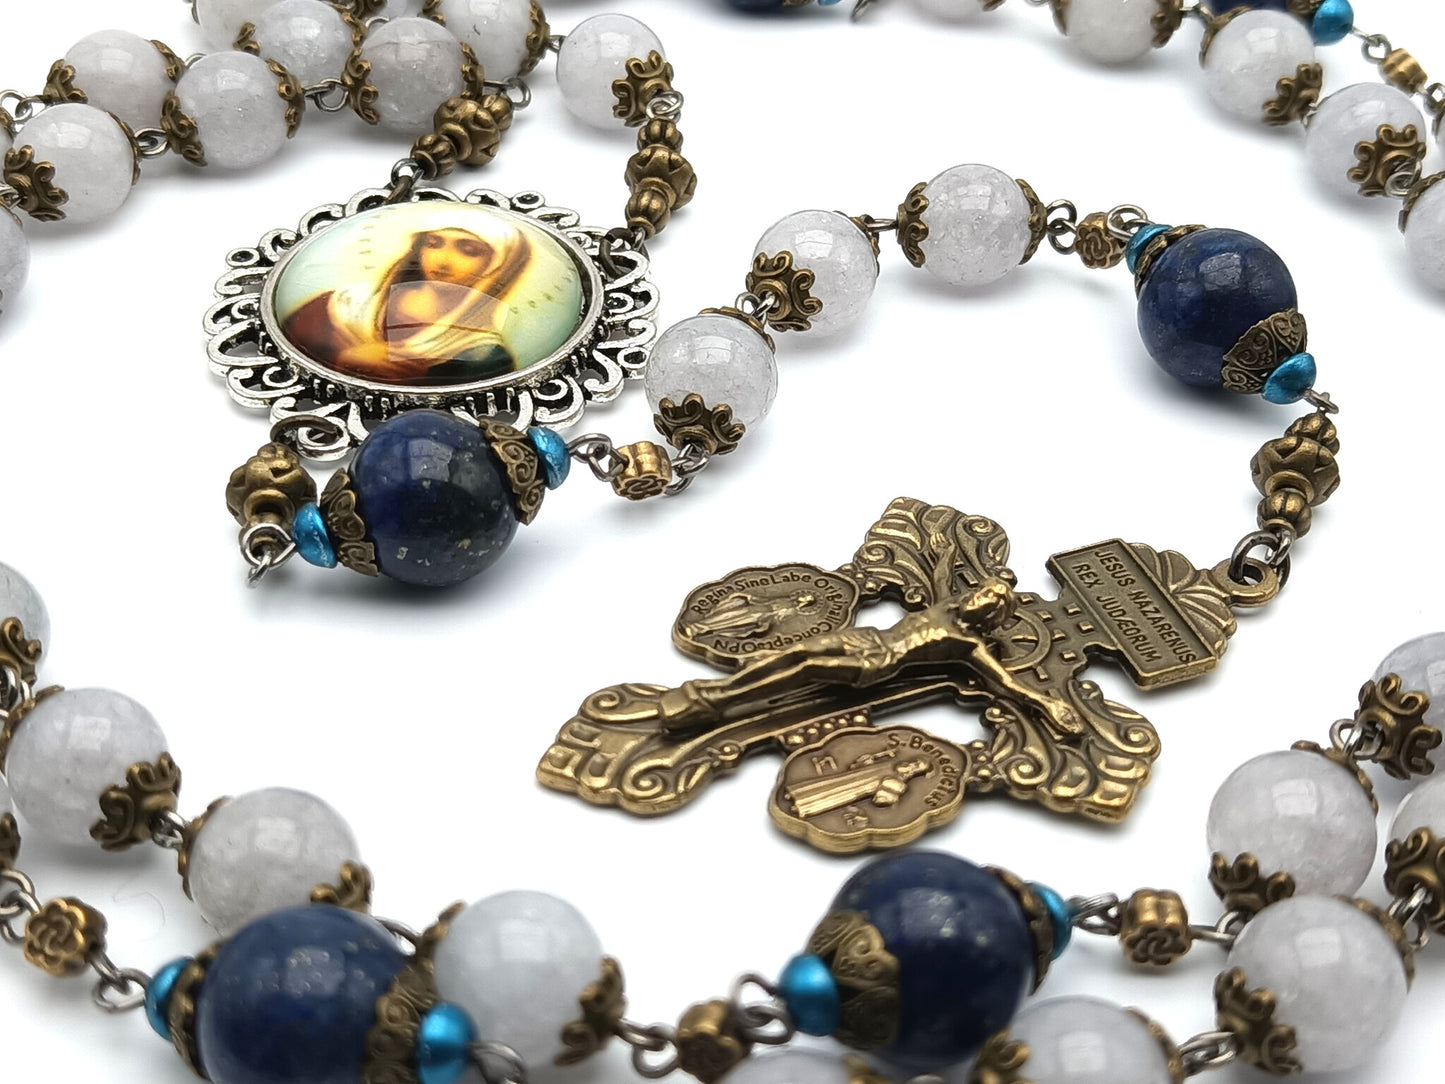 Twelve stars of Mary unique rosary beads with opal gemstone beads, bronze pardon crucifix, blue lapis pater beads and silver picture centre medal.